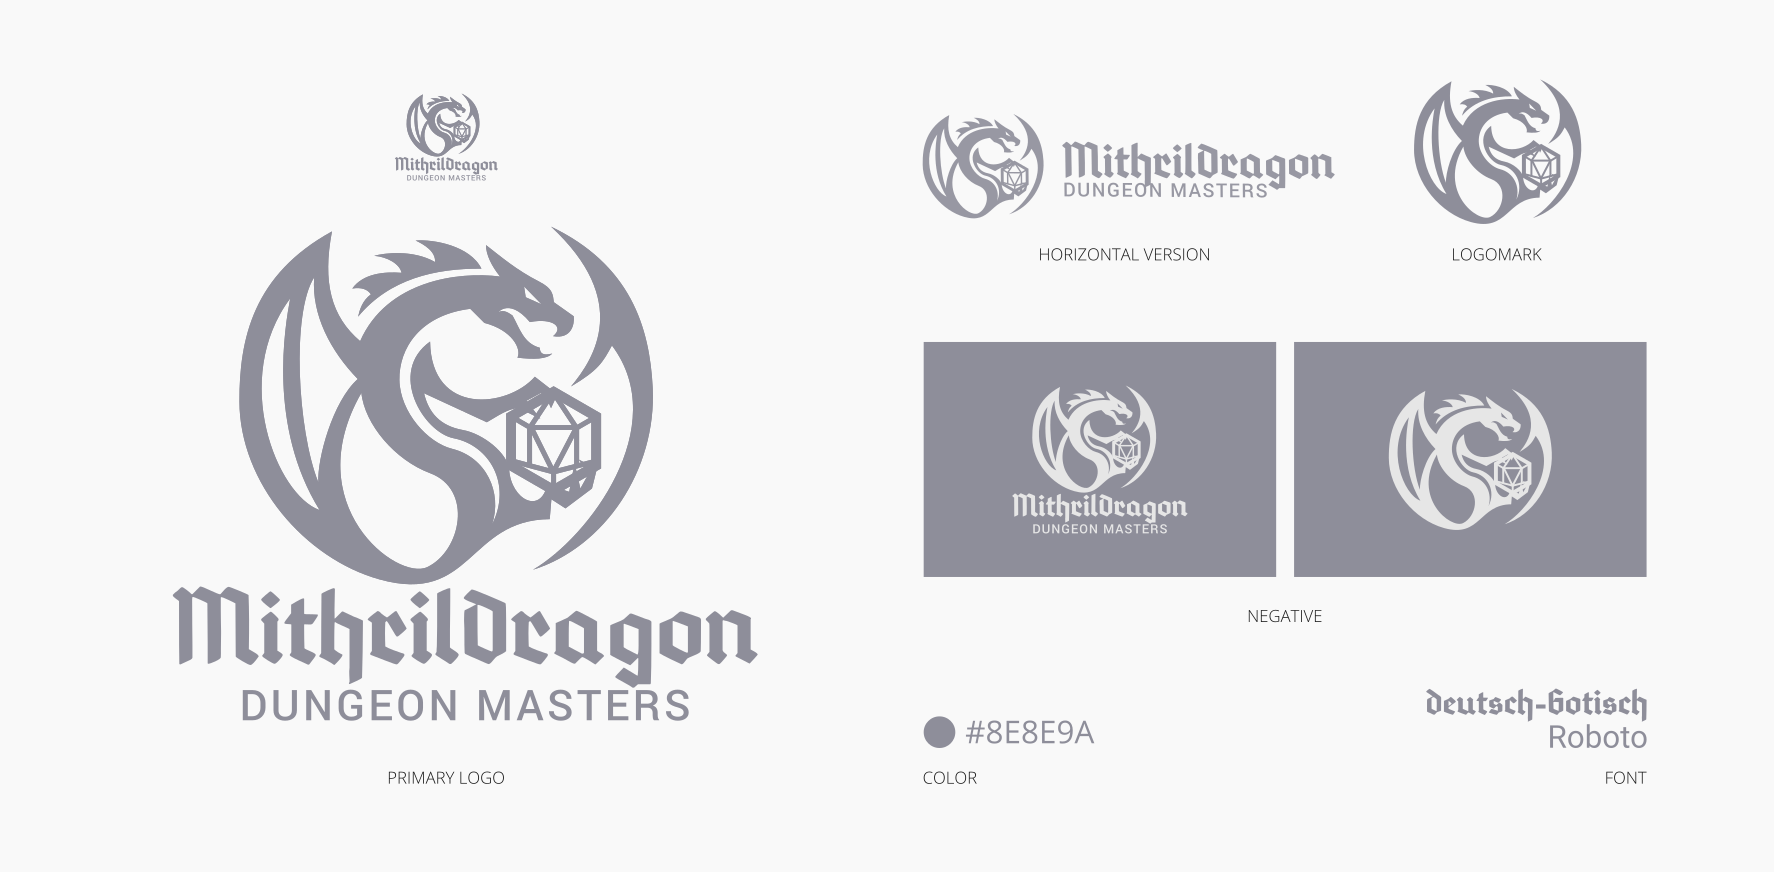 The logo design and brand style guide for Mithril Dragon Dungeon Masters